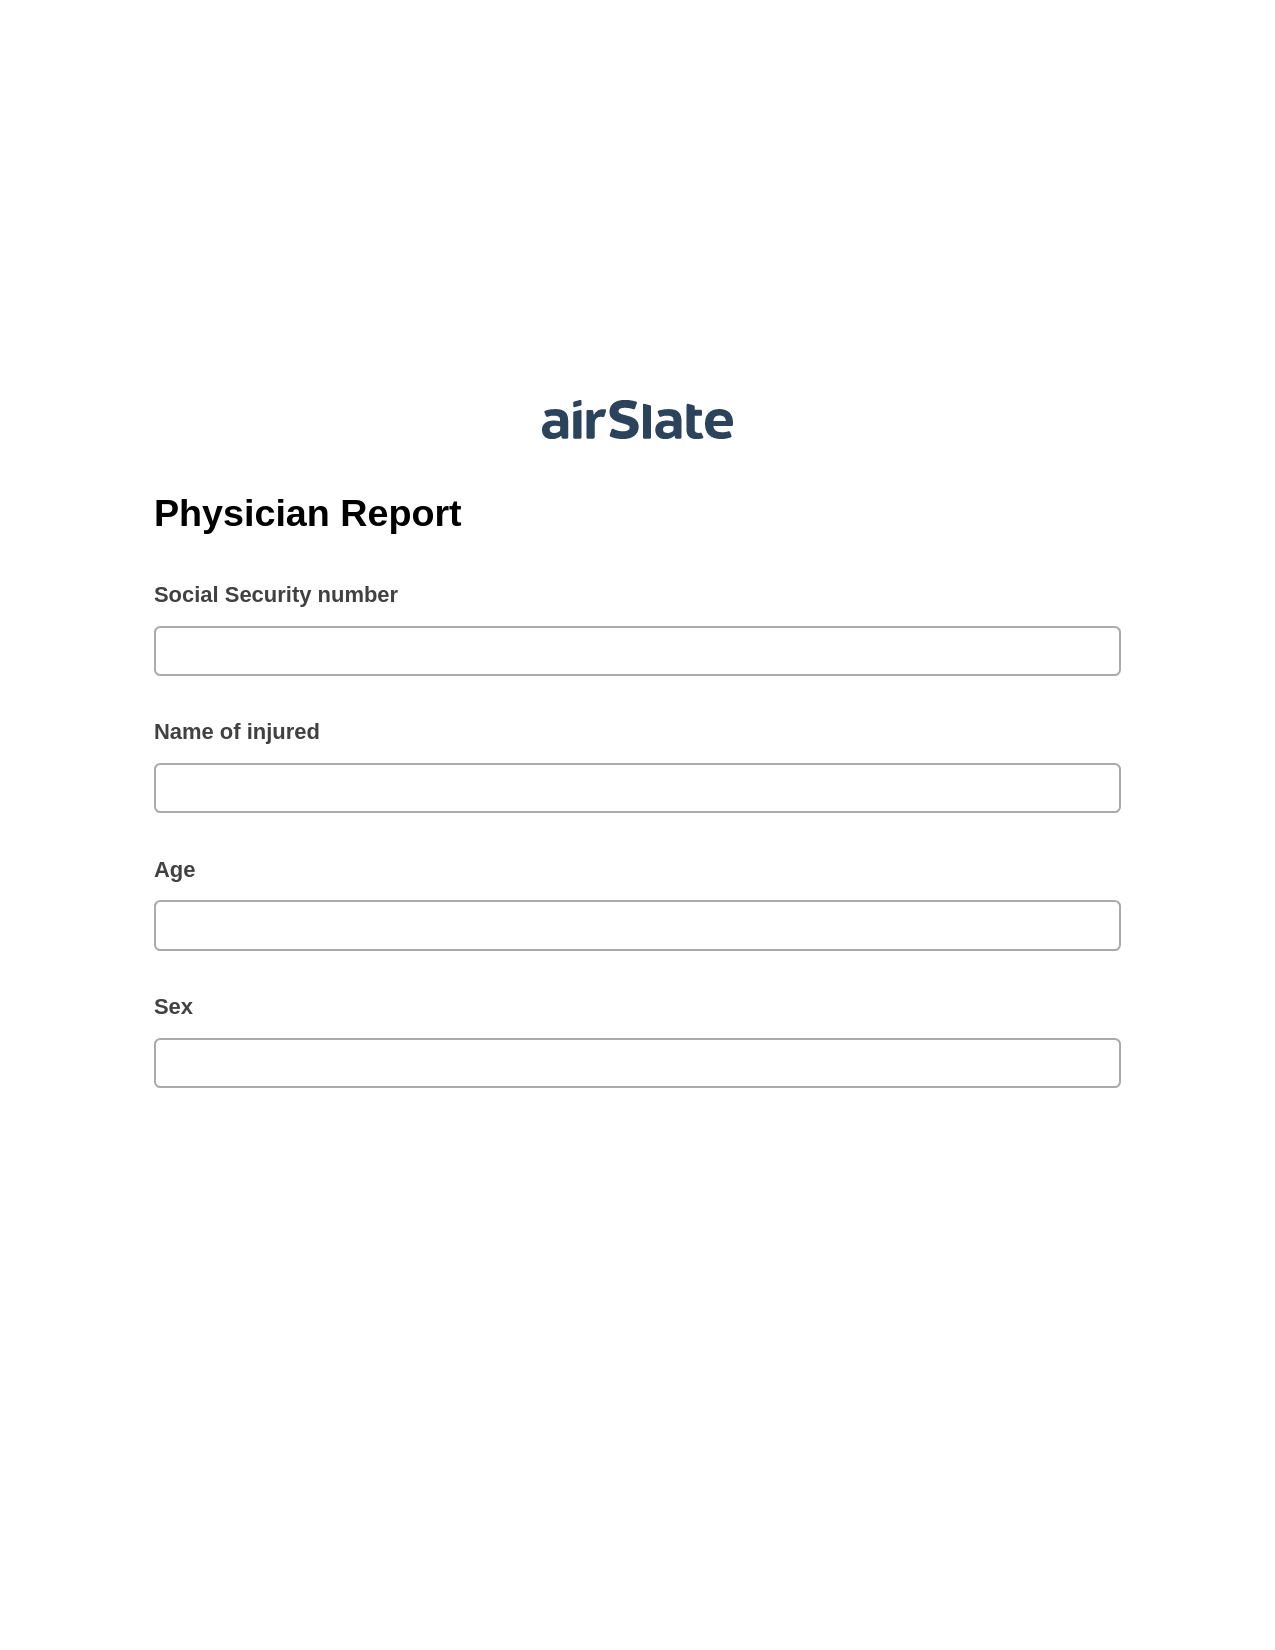 Physician Report Pre-fill from Excel Spreadsheet Bot, Send Mailchimp Campaign Bot, Export to WebMerge Bot